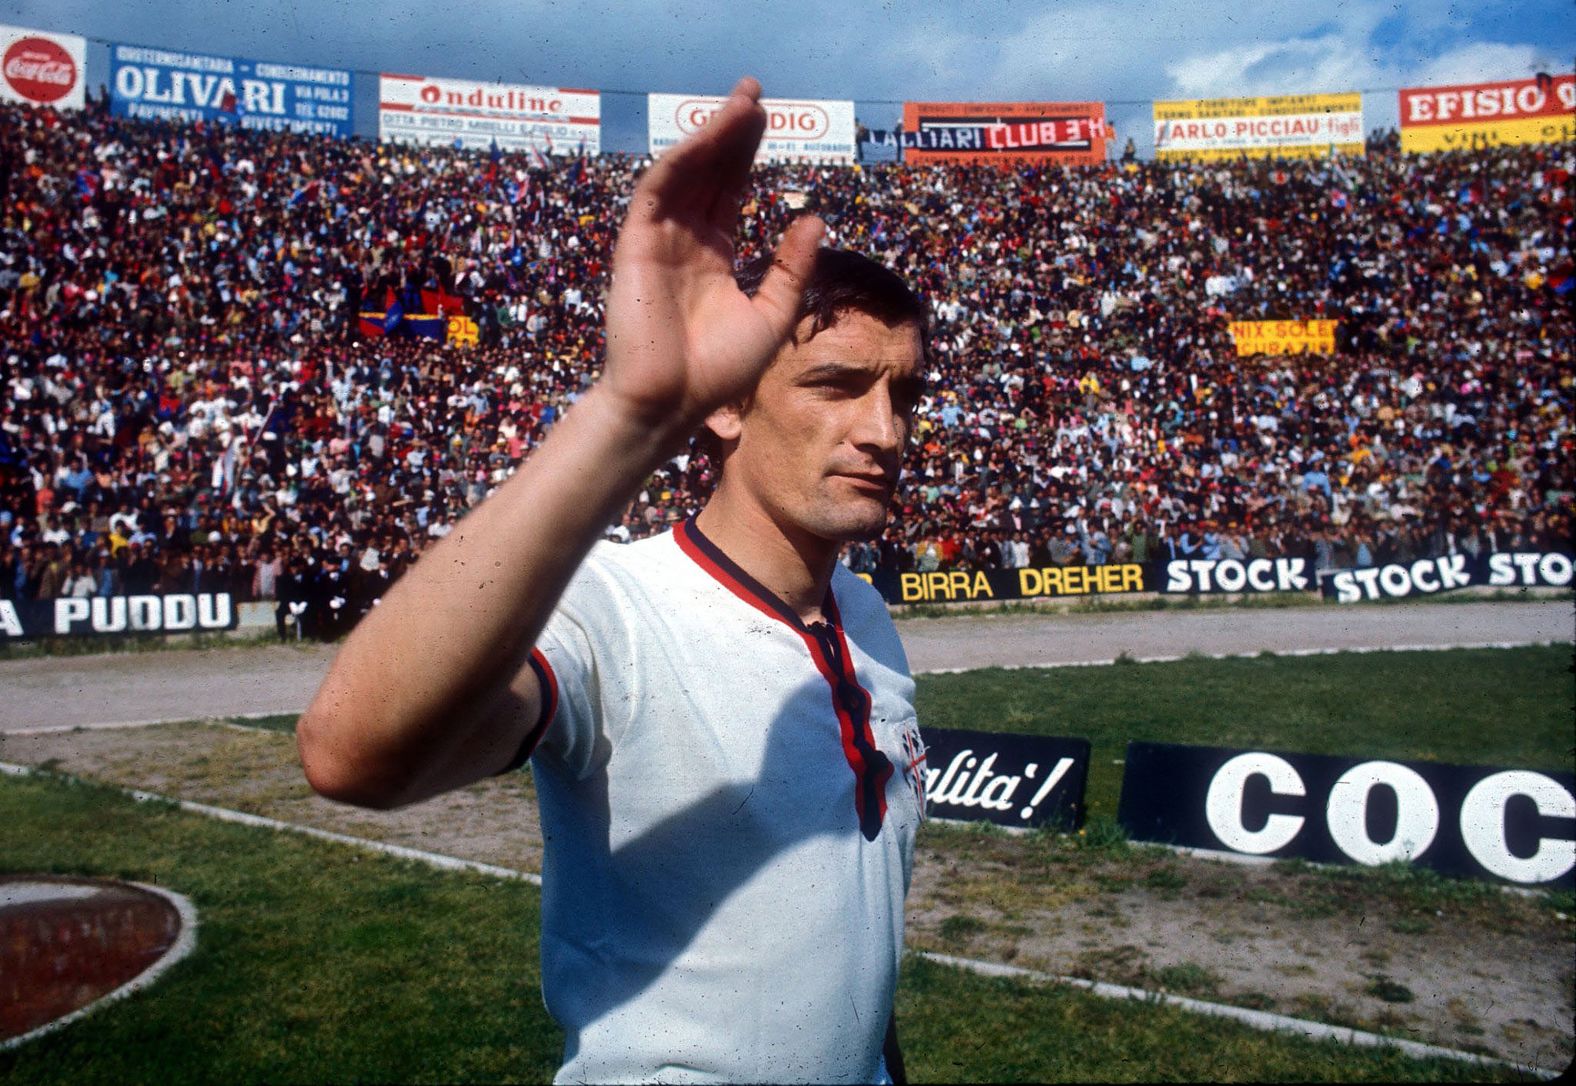 Italian soccer great <a href="https://www.cnn.com/2024/01/23/sport/gigi-riva-italy-cagliari-obit-spt-intl/index.html" target="_blank">Luigi "Gigi" Riva</a> died January 22 at the age of 79, according to the Italian Football Federation. Riva is Italy's all-time leading goalscorer.